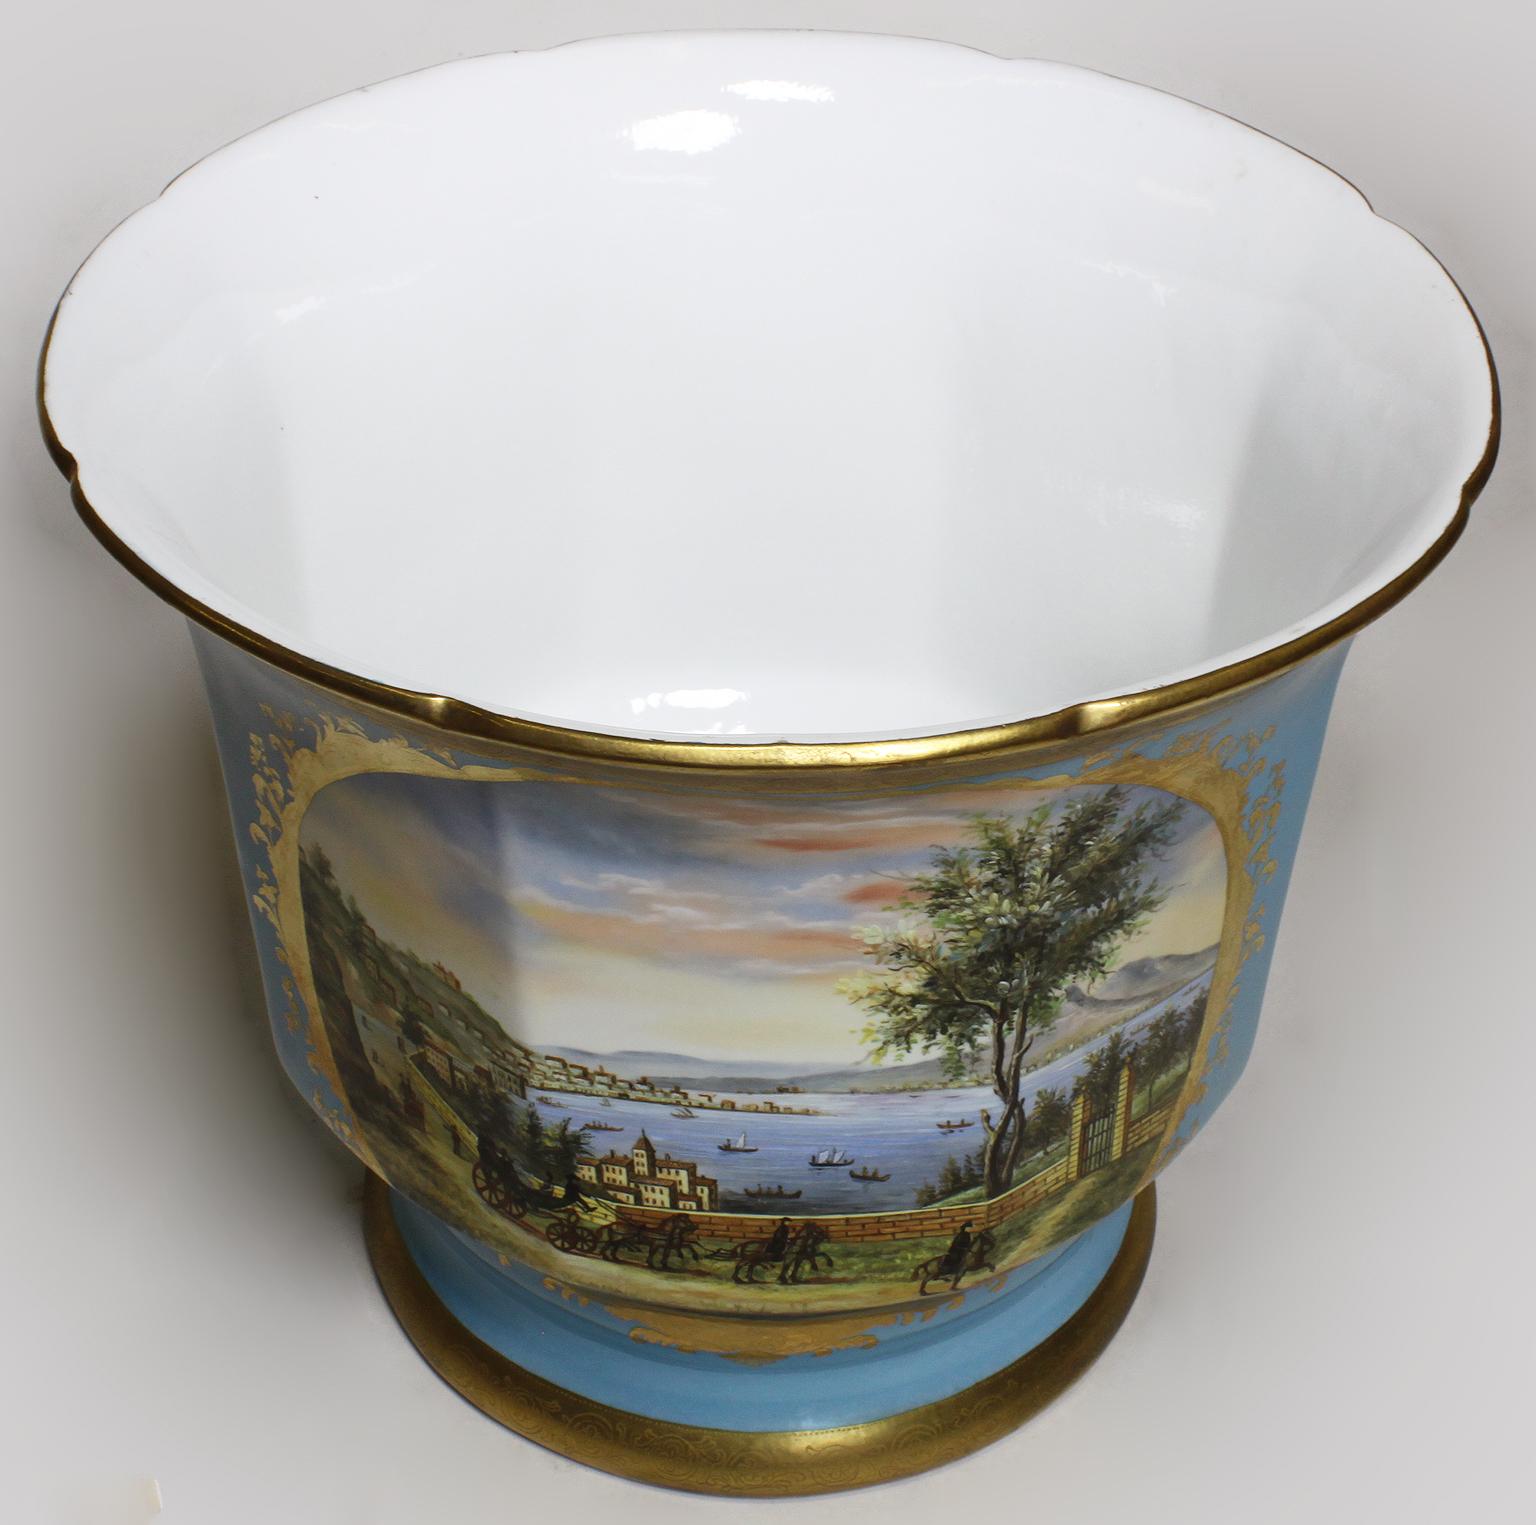 Continental 19th-20th Century Porcelain Cachepot Planter Vases Wine Coolers Pair For Sale 6